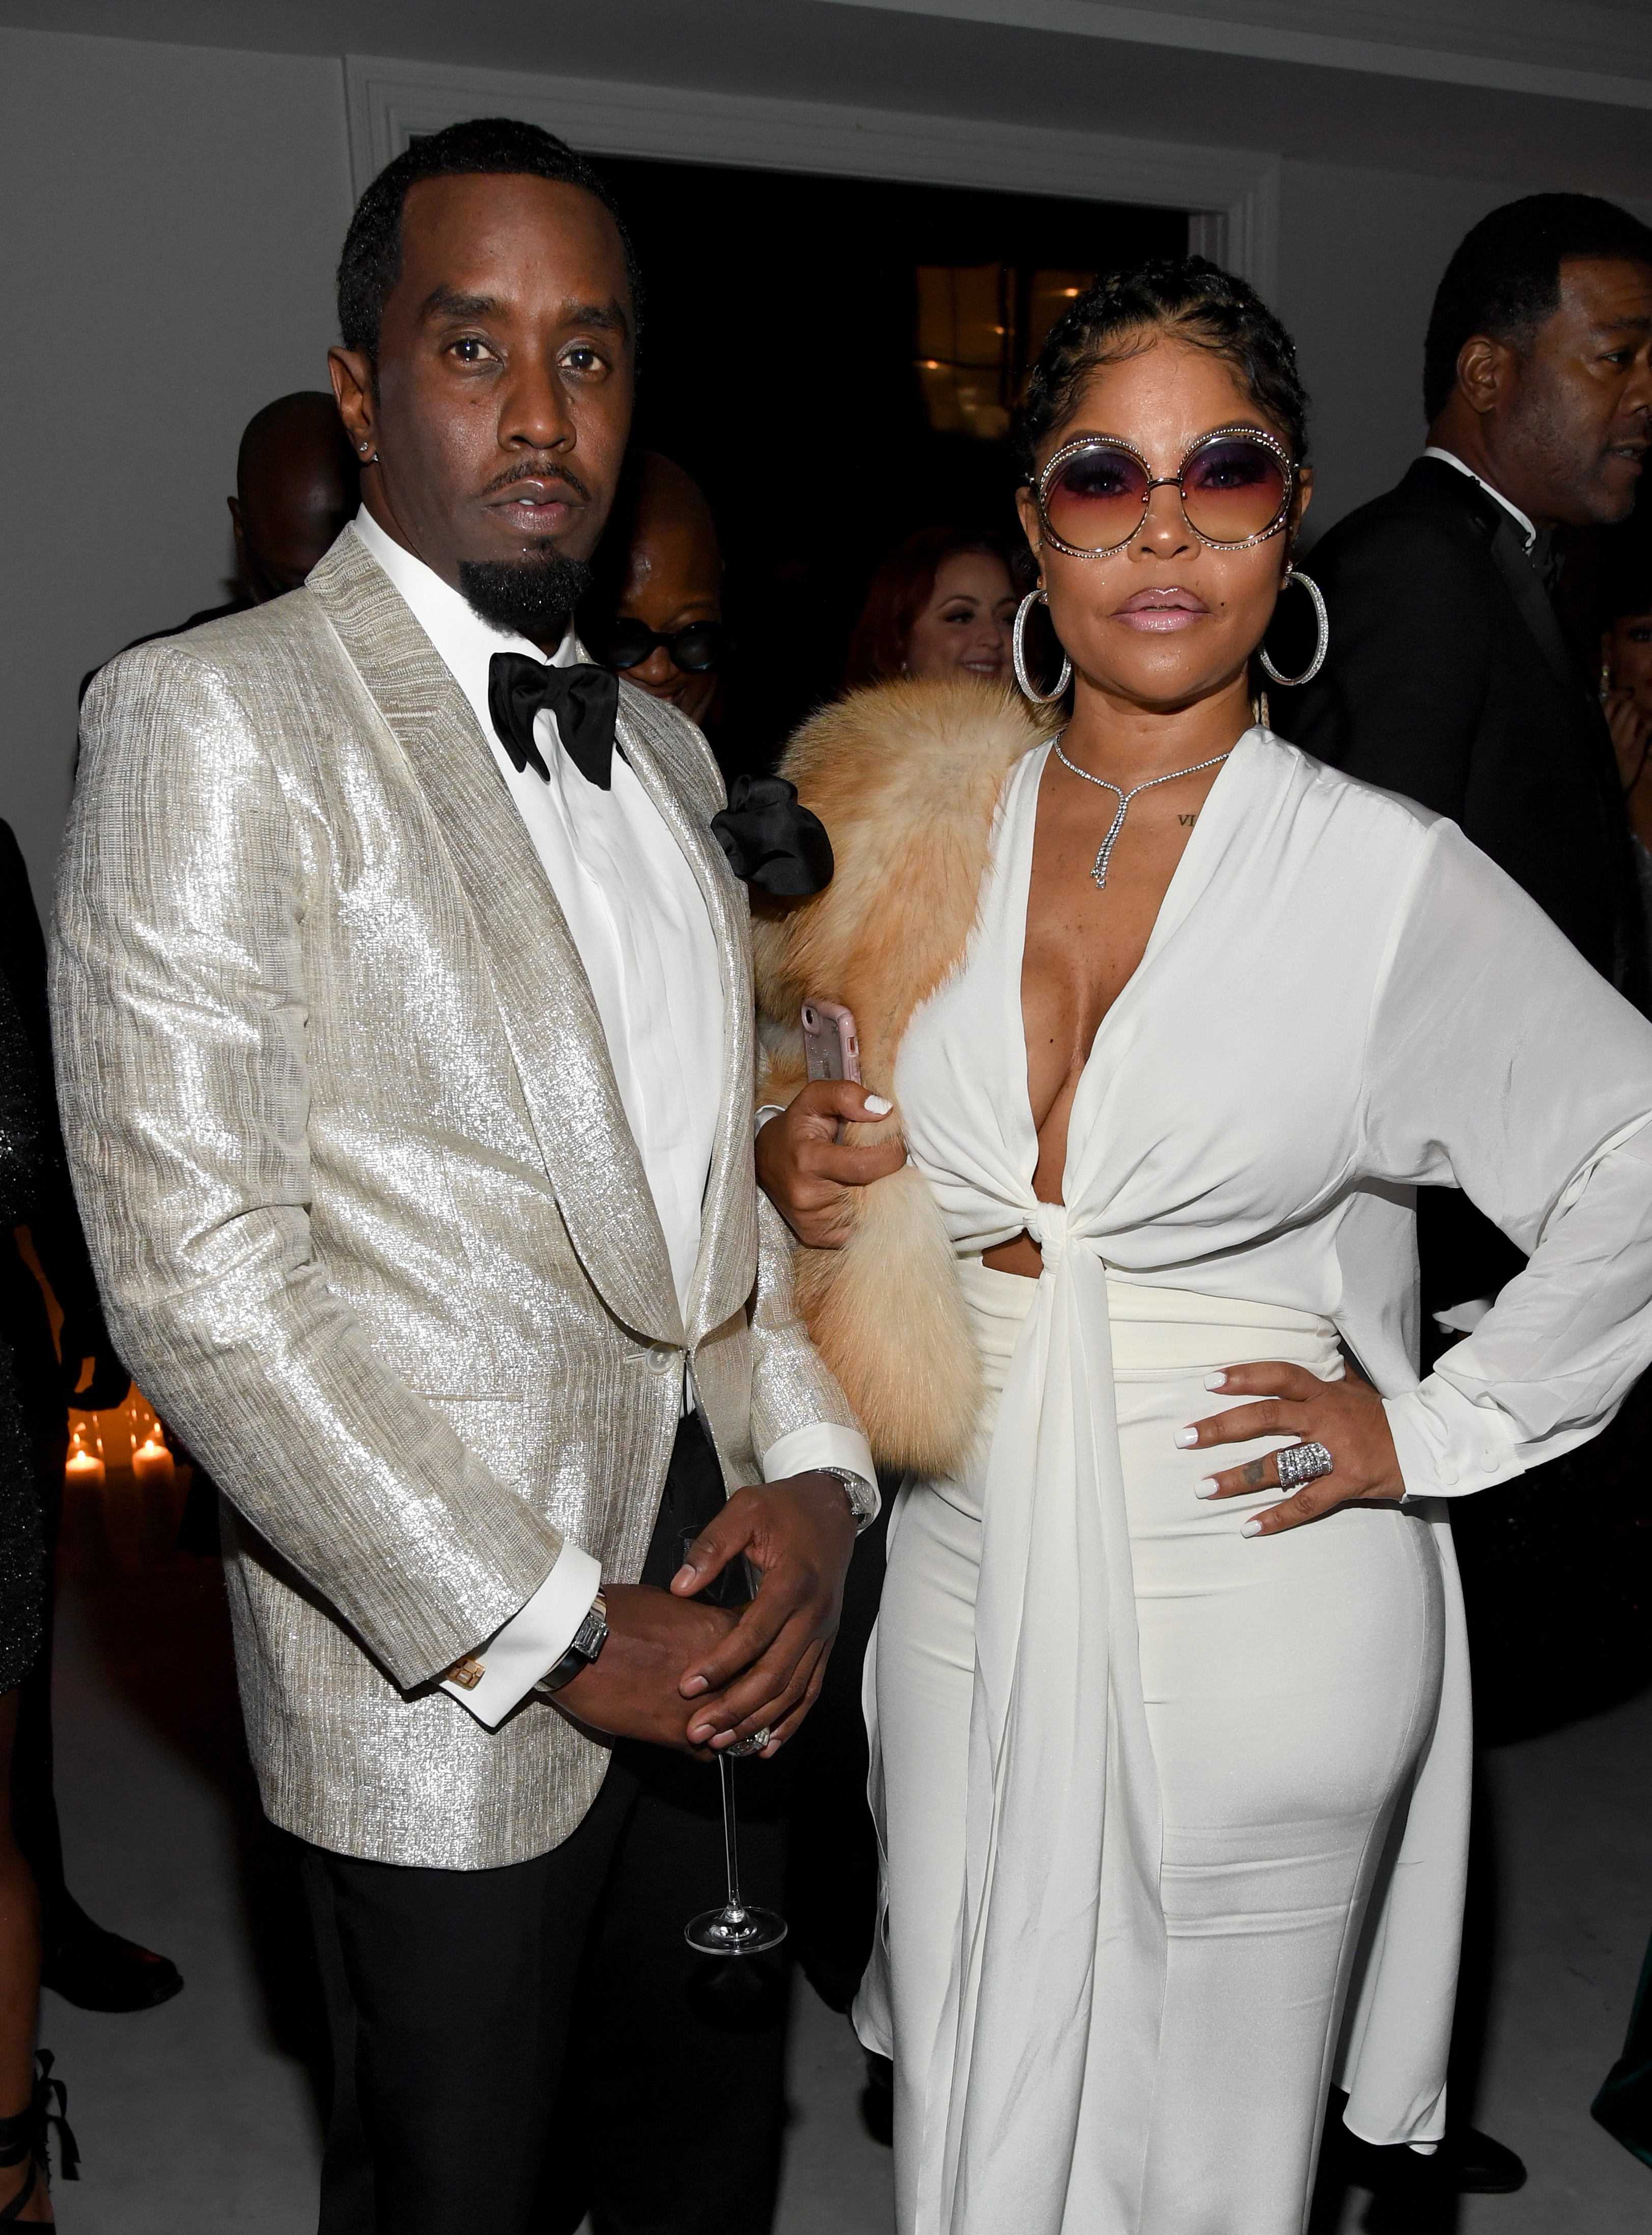 Sean "Diddy" Combs and Misa Hylton at a party in 2019.